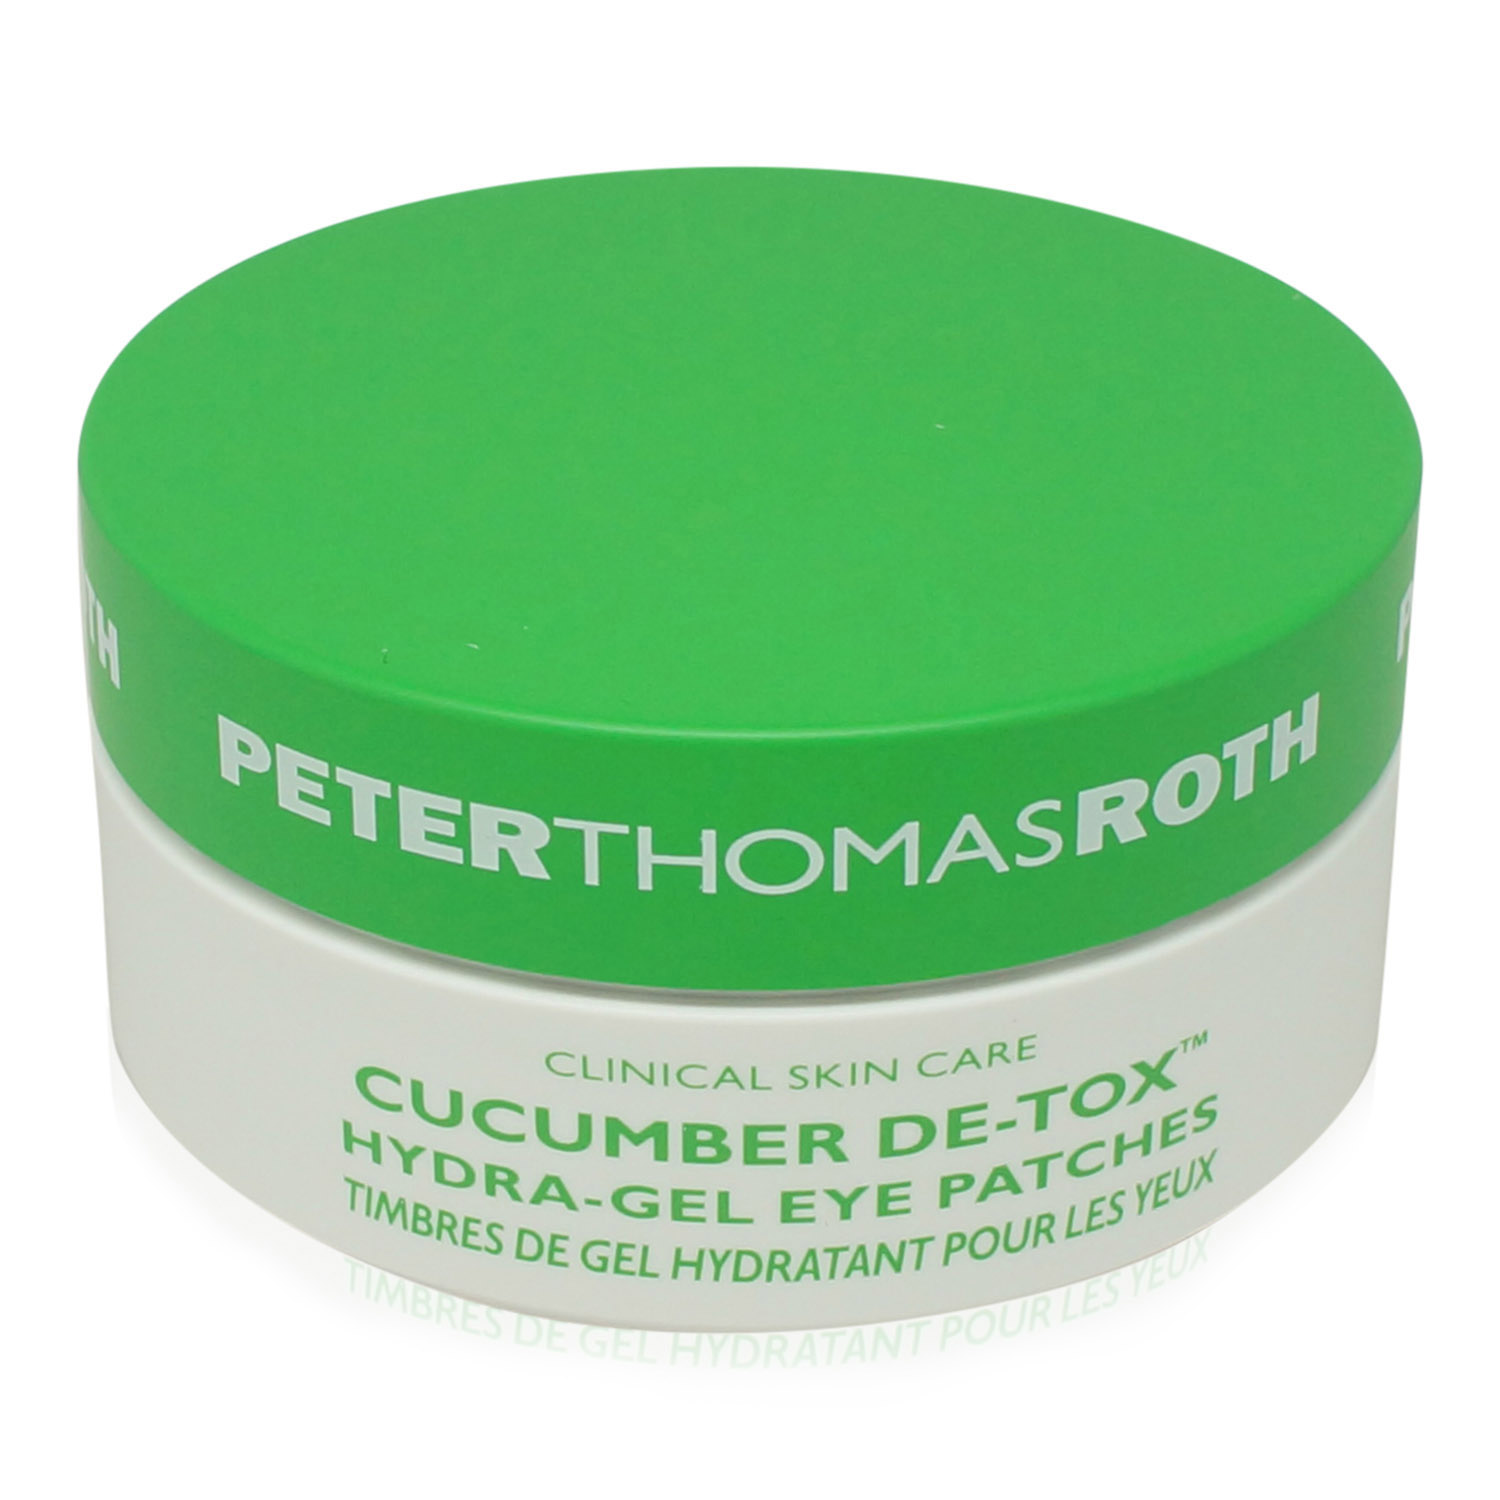 Cucumber De-Tox Hydra-Gel Eye Patches by Peter Thomas Roth for Unisex - 60 Pc Patches - image 2 of 3